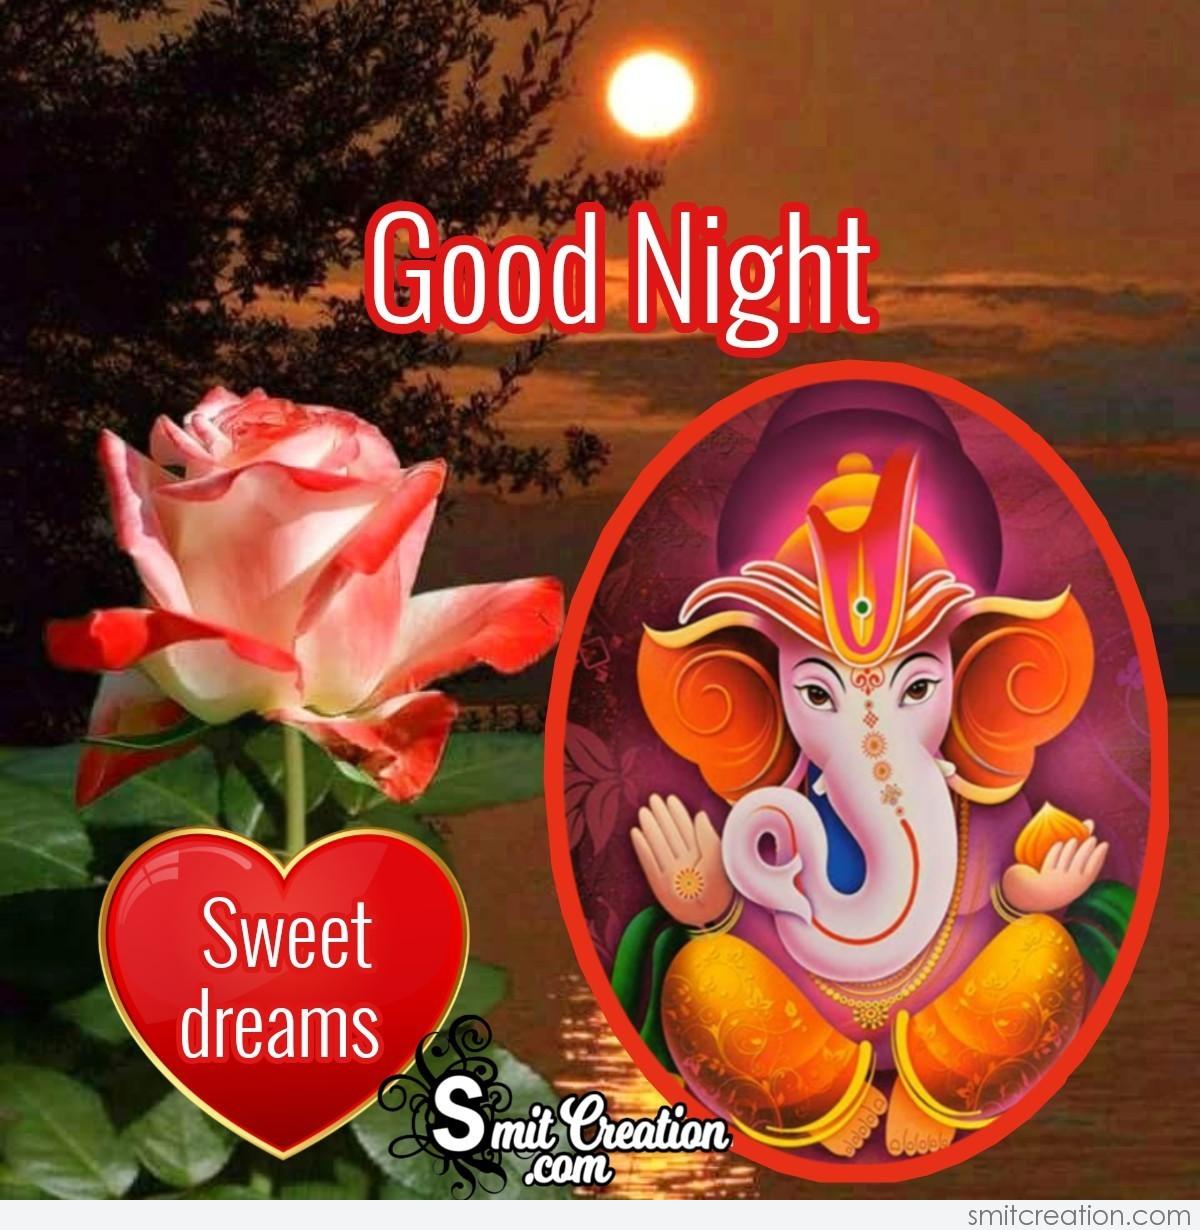 Good Night God Image, Picture and Graphics